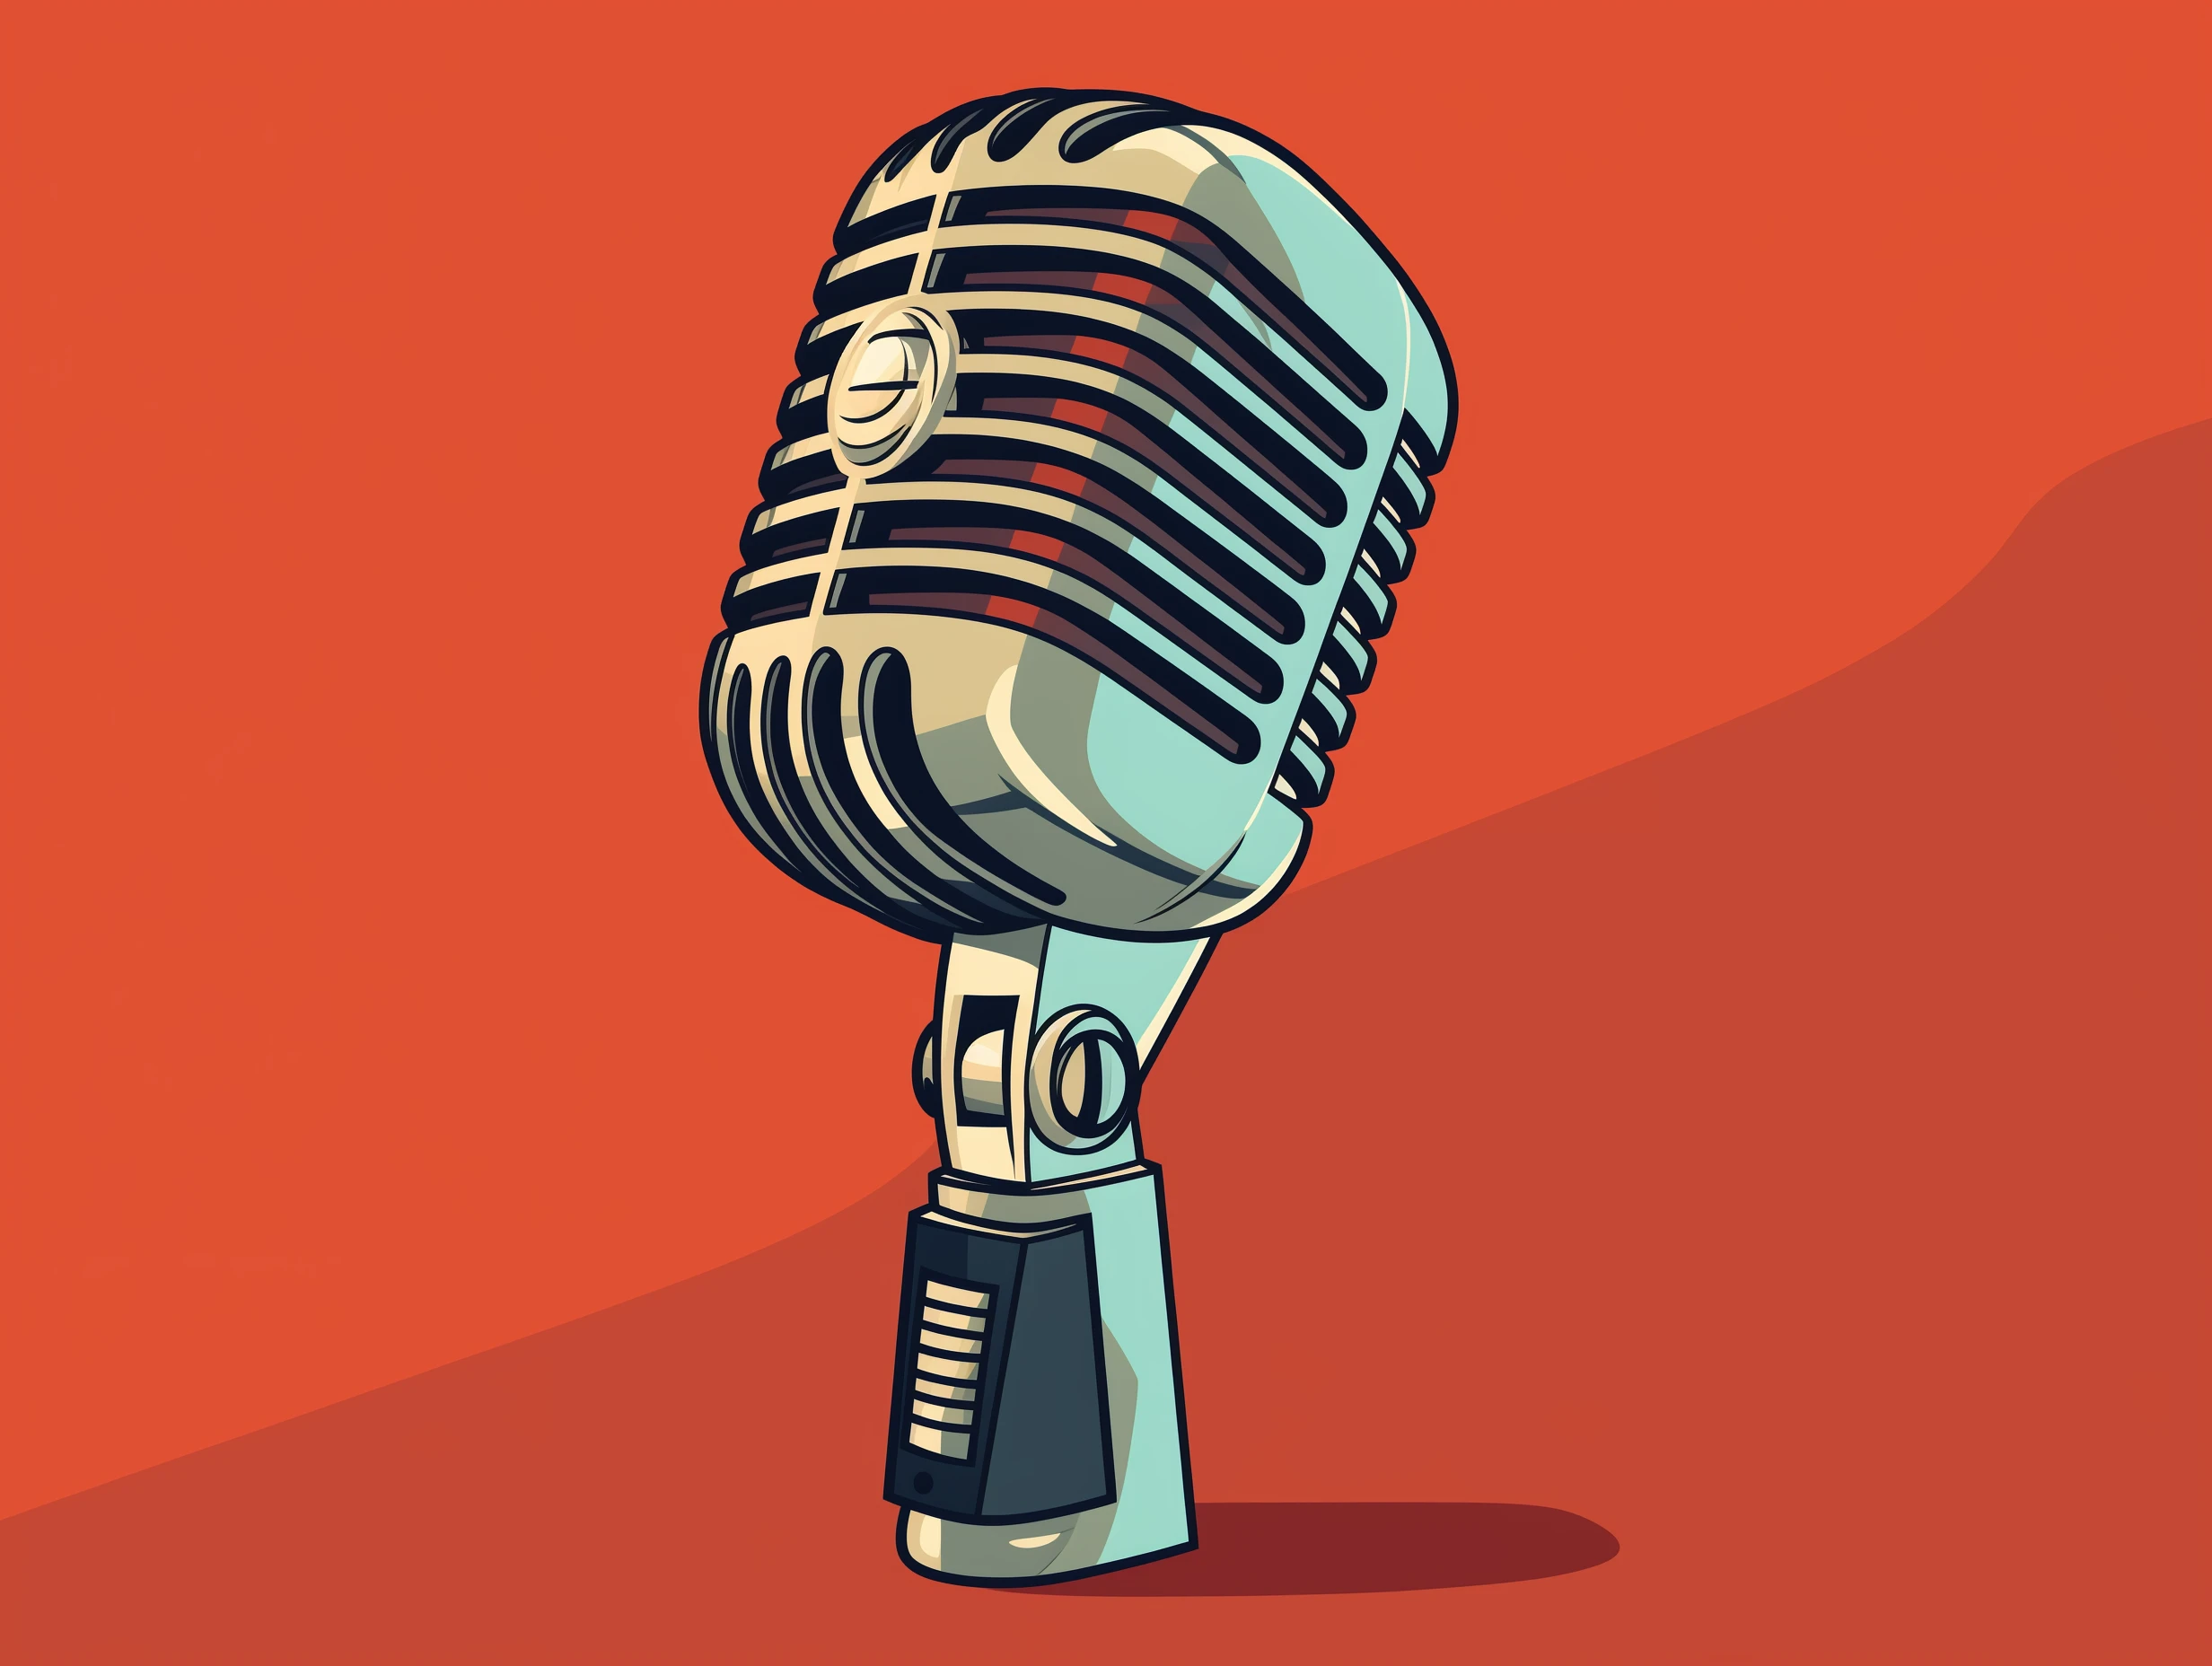 old style microphone illustrations on an orange background